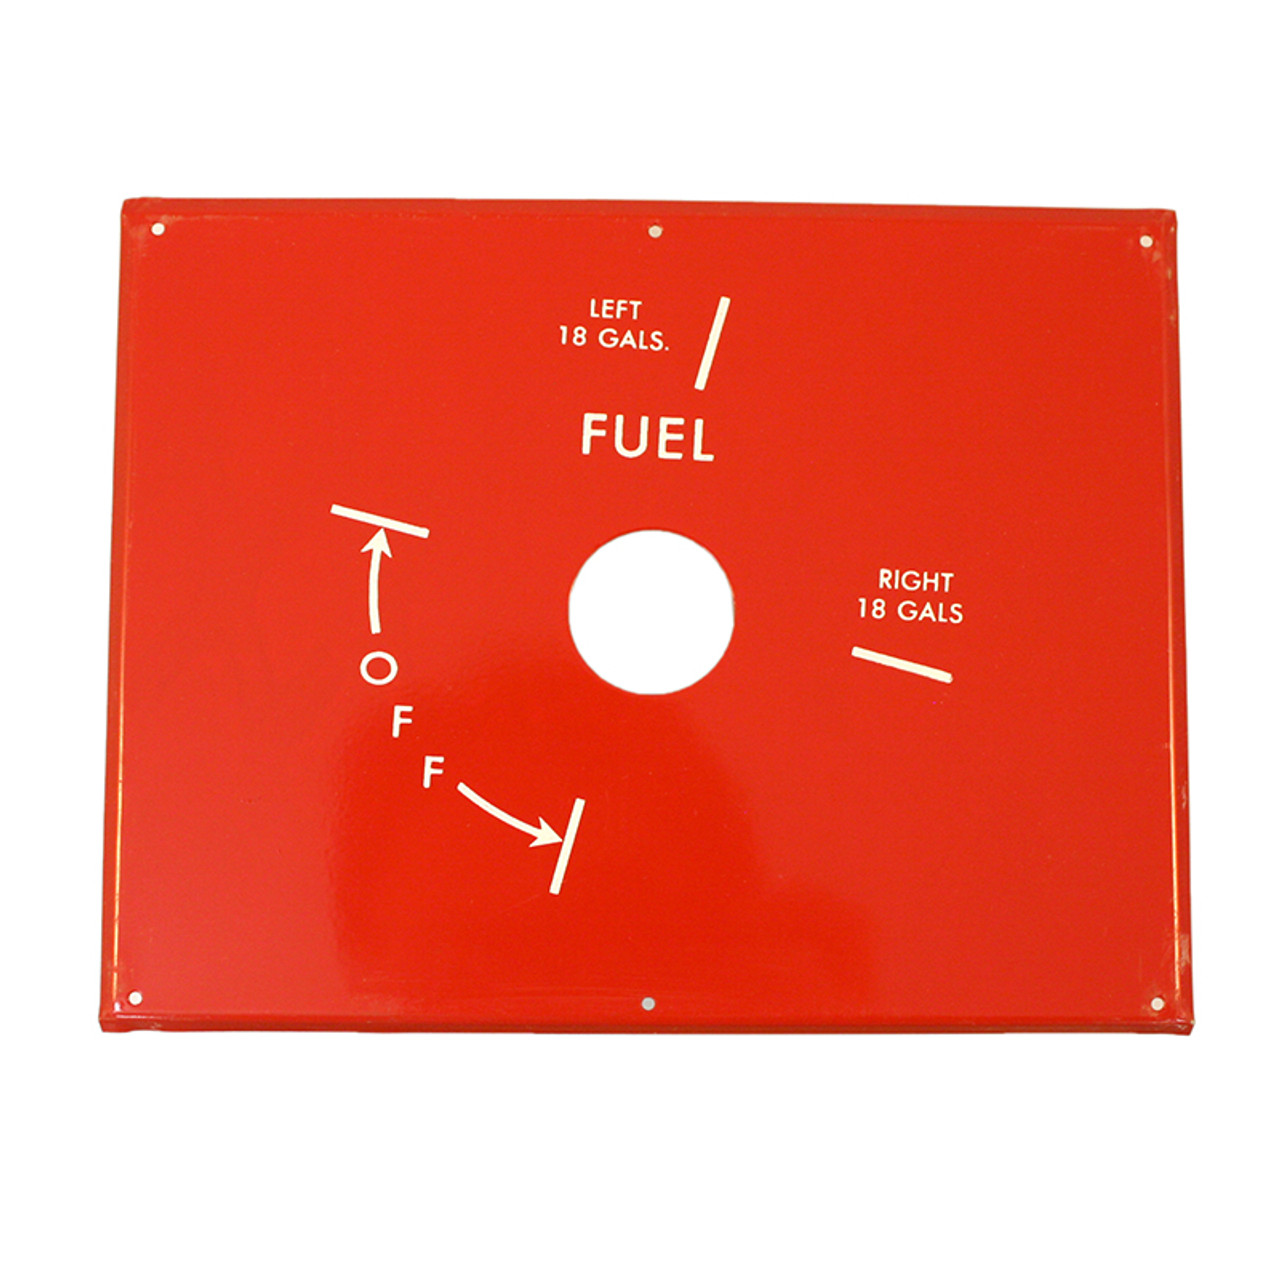 -12838-002   PIPER FUEL SELECTOR PLATE - RED